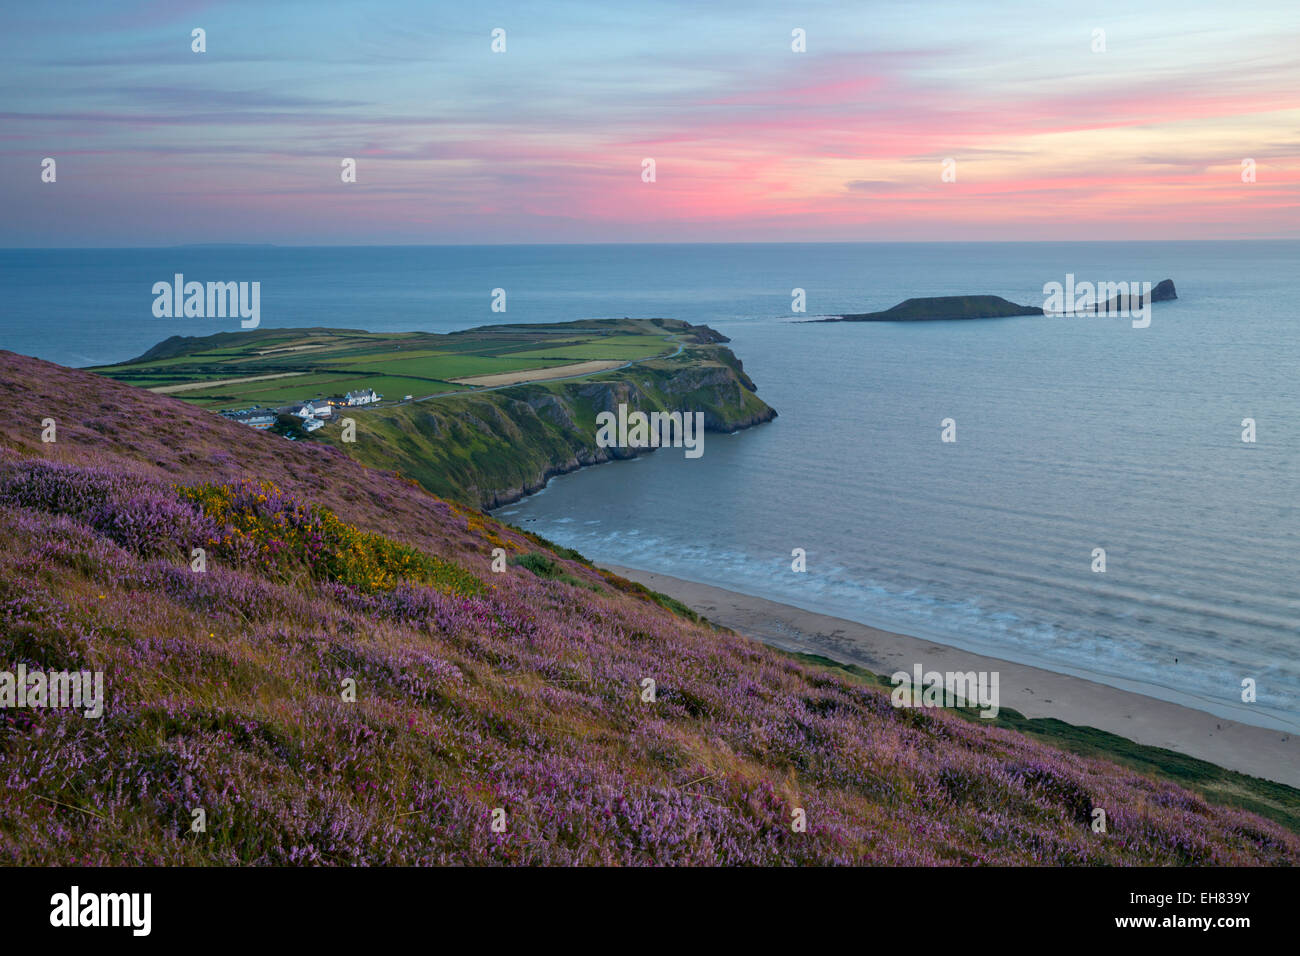 Worms Head and Rhossili Bay with Heather-clad cliffs, Gower Peninsula, Swansea, West Glamorgan, Wales, United Kingdom, Europe Stock Photo